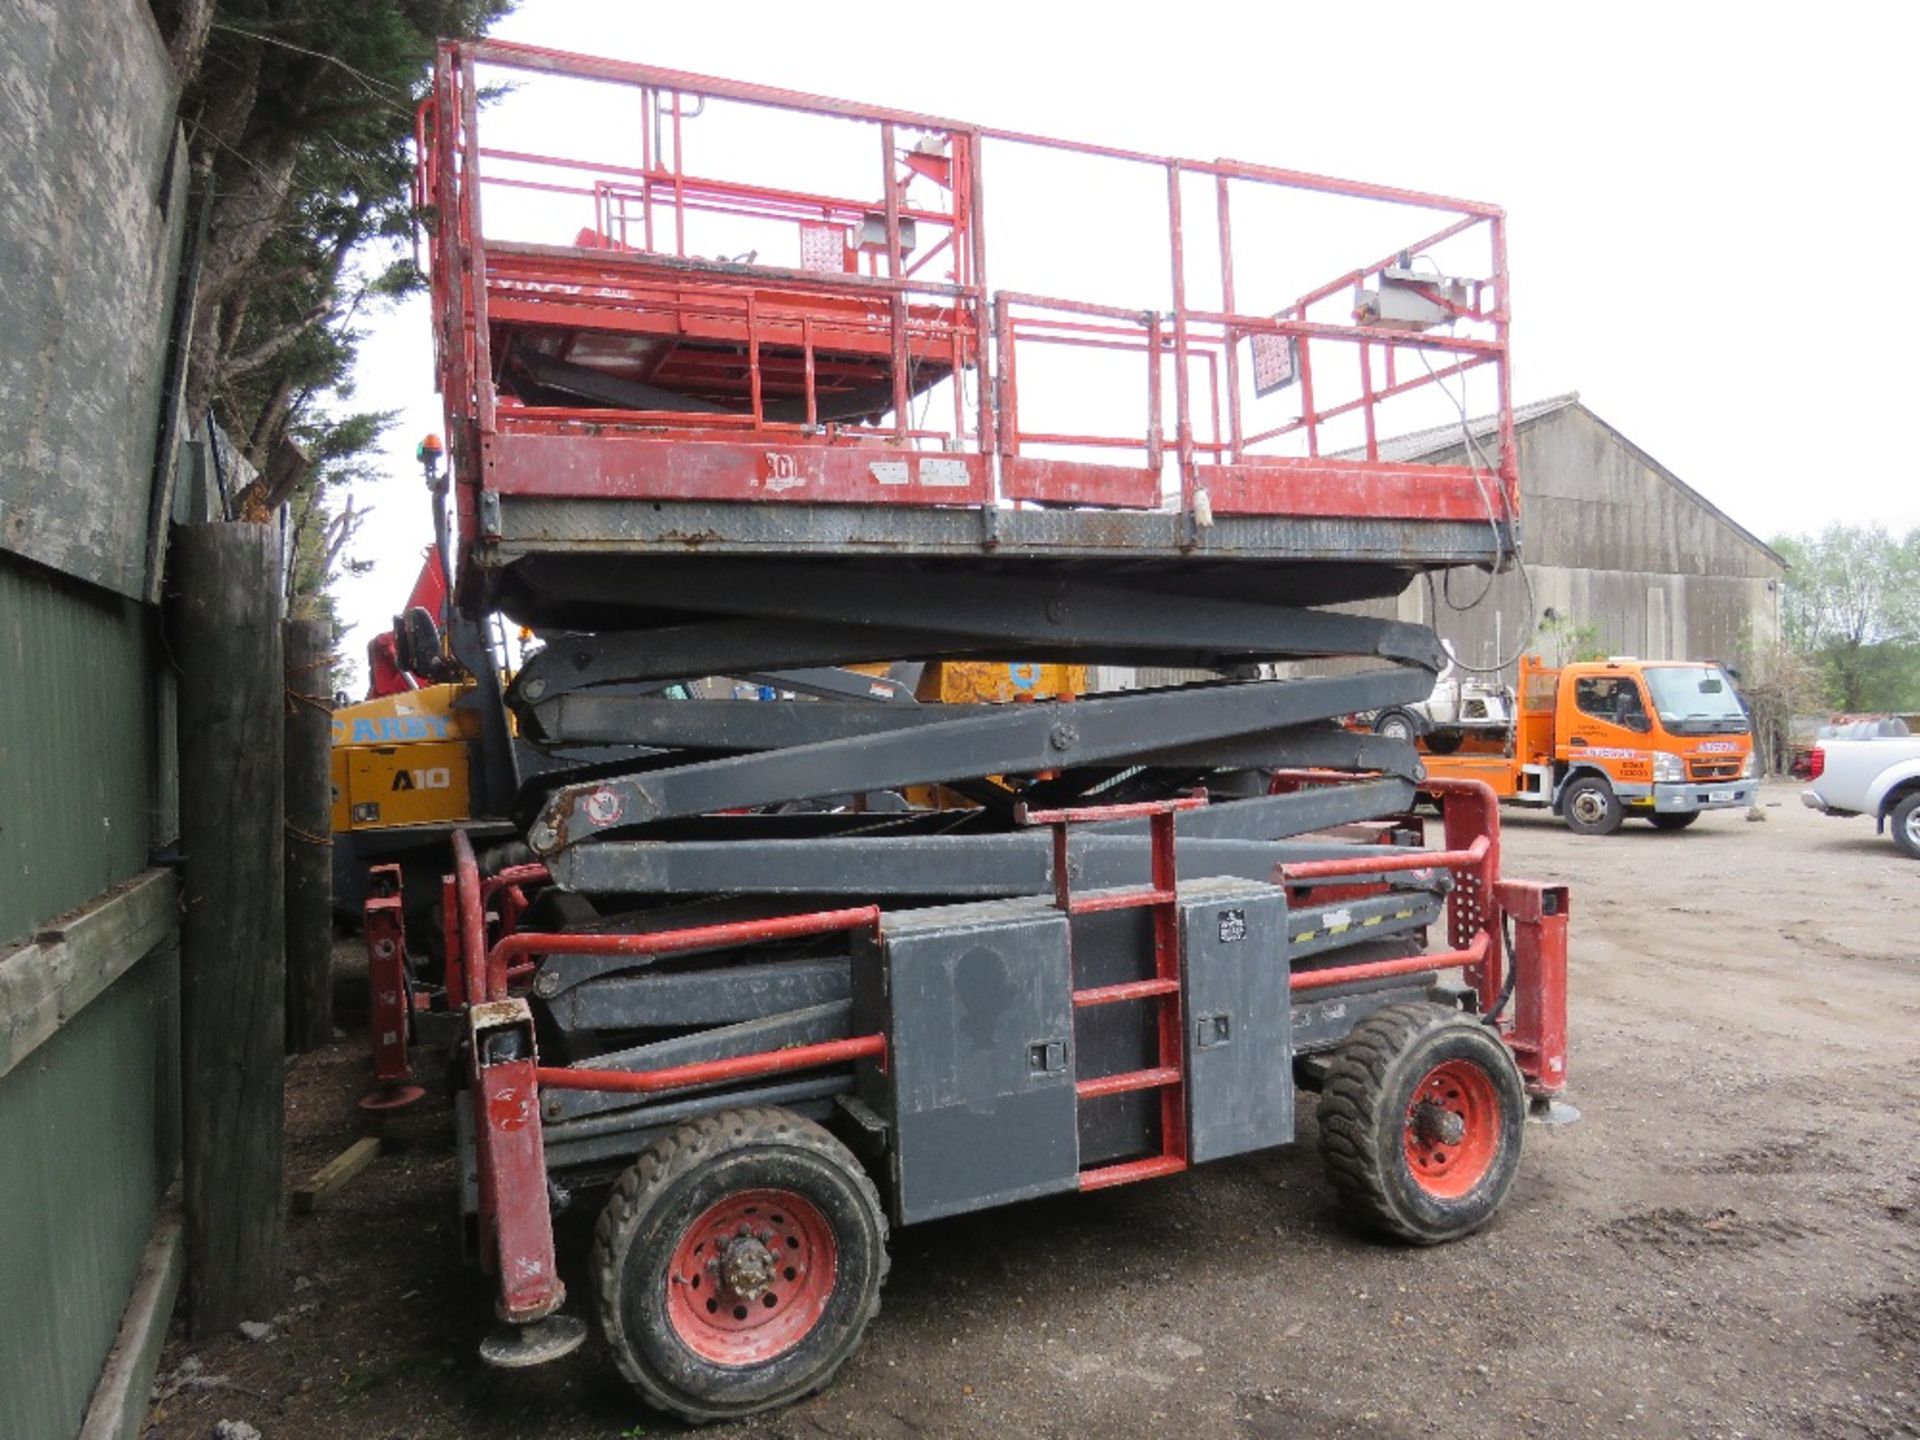 SKYJACK 8841RT ROUGH TERRAIN SCISSOR LIFT ACCESS UNIT, YEAR 2015. SN:40001778. WHEN TESTED WAS S - Image 2 of 6